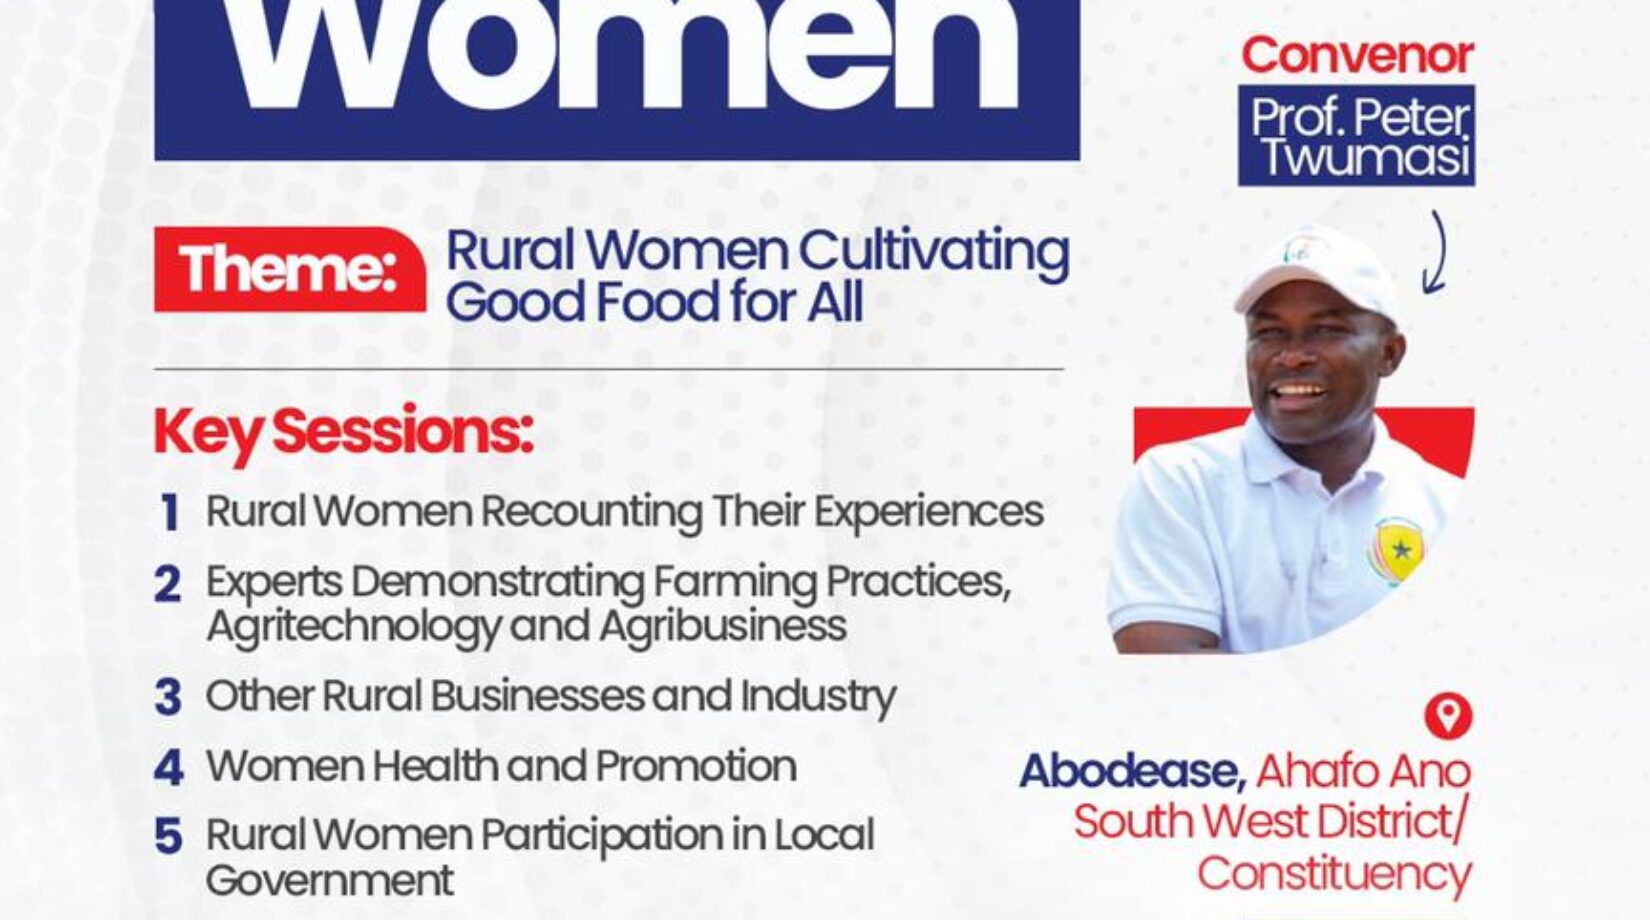 Prof. Peter Twumasi Honors Women in Ahafo Ano South West on Int’L Day of Rural Women.